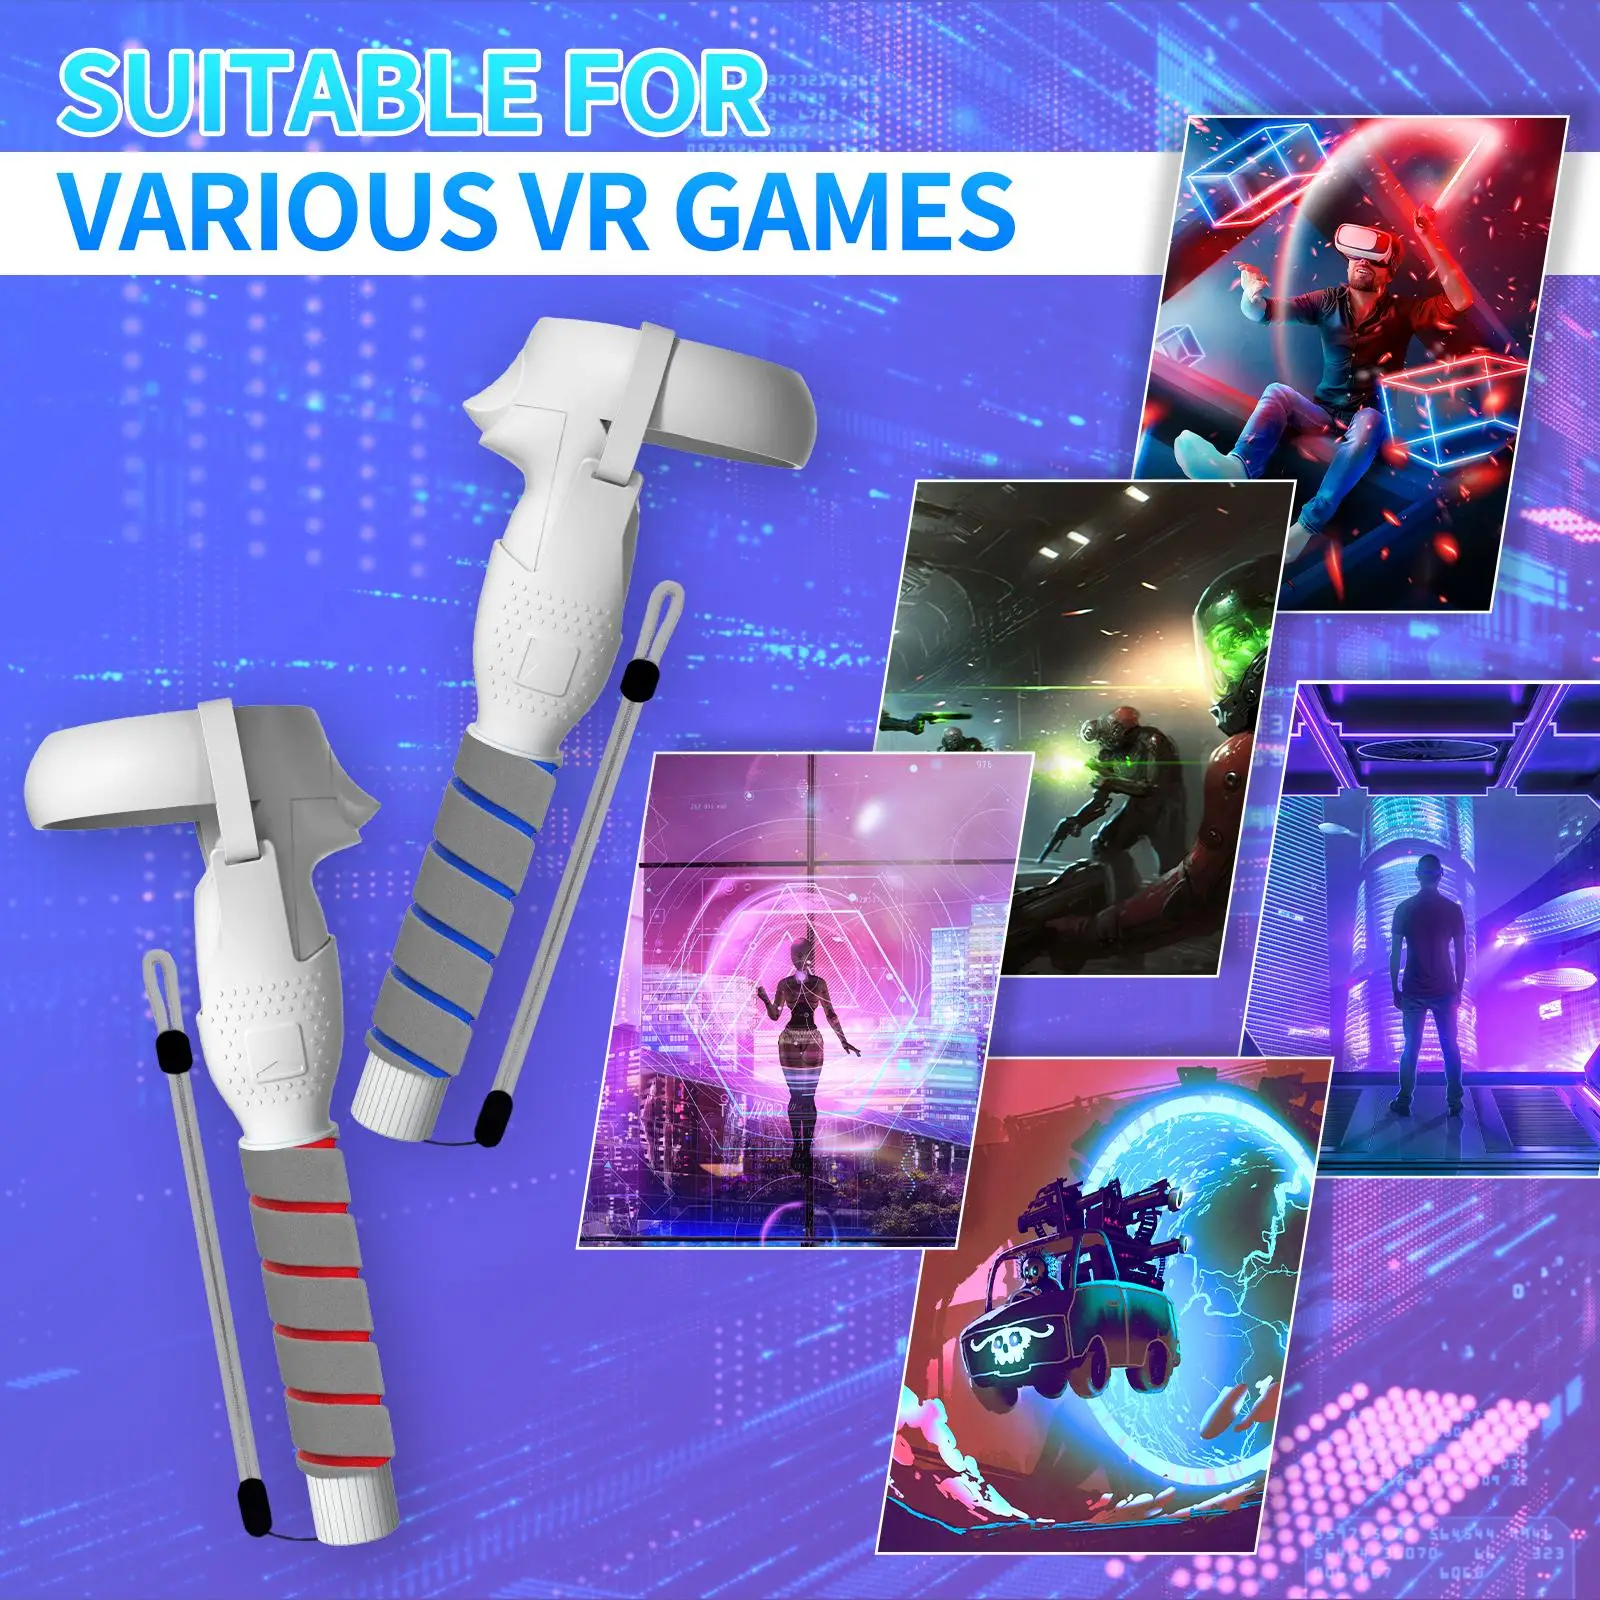 VR Game Handle Accessories Sturdy Playing VR Games Assembly Easy to Install Direct Replaces Comfortable for Quest 2 Controllers